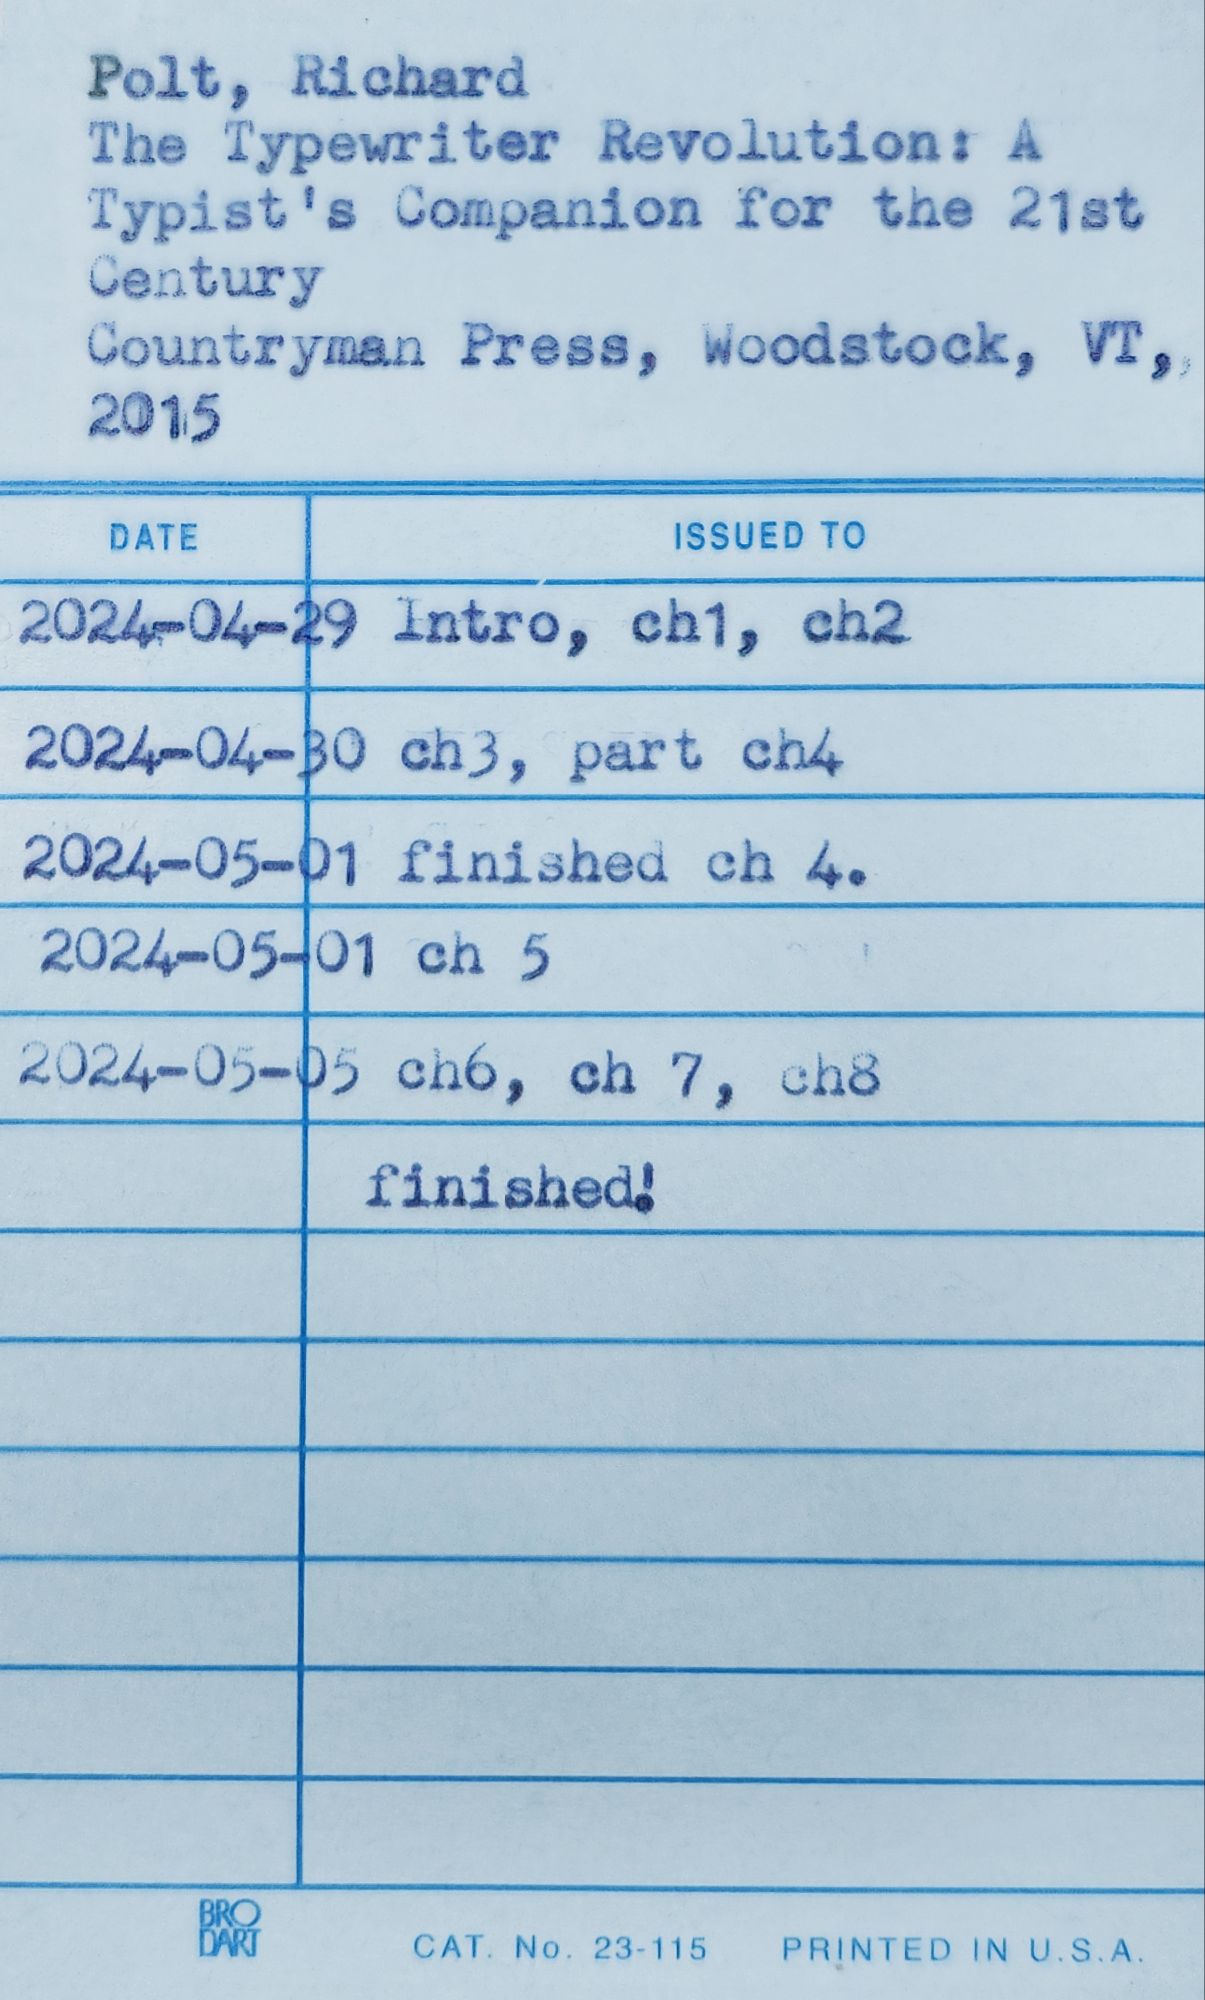 Same book card filled in with entries on April 30, May 1, and May 5th showing the finishing of Chapters 3-8.